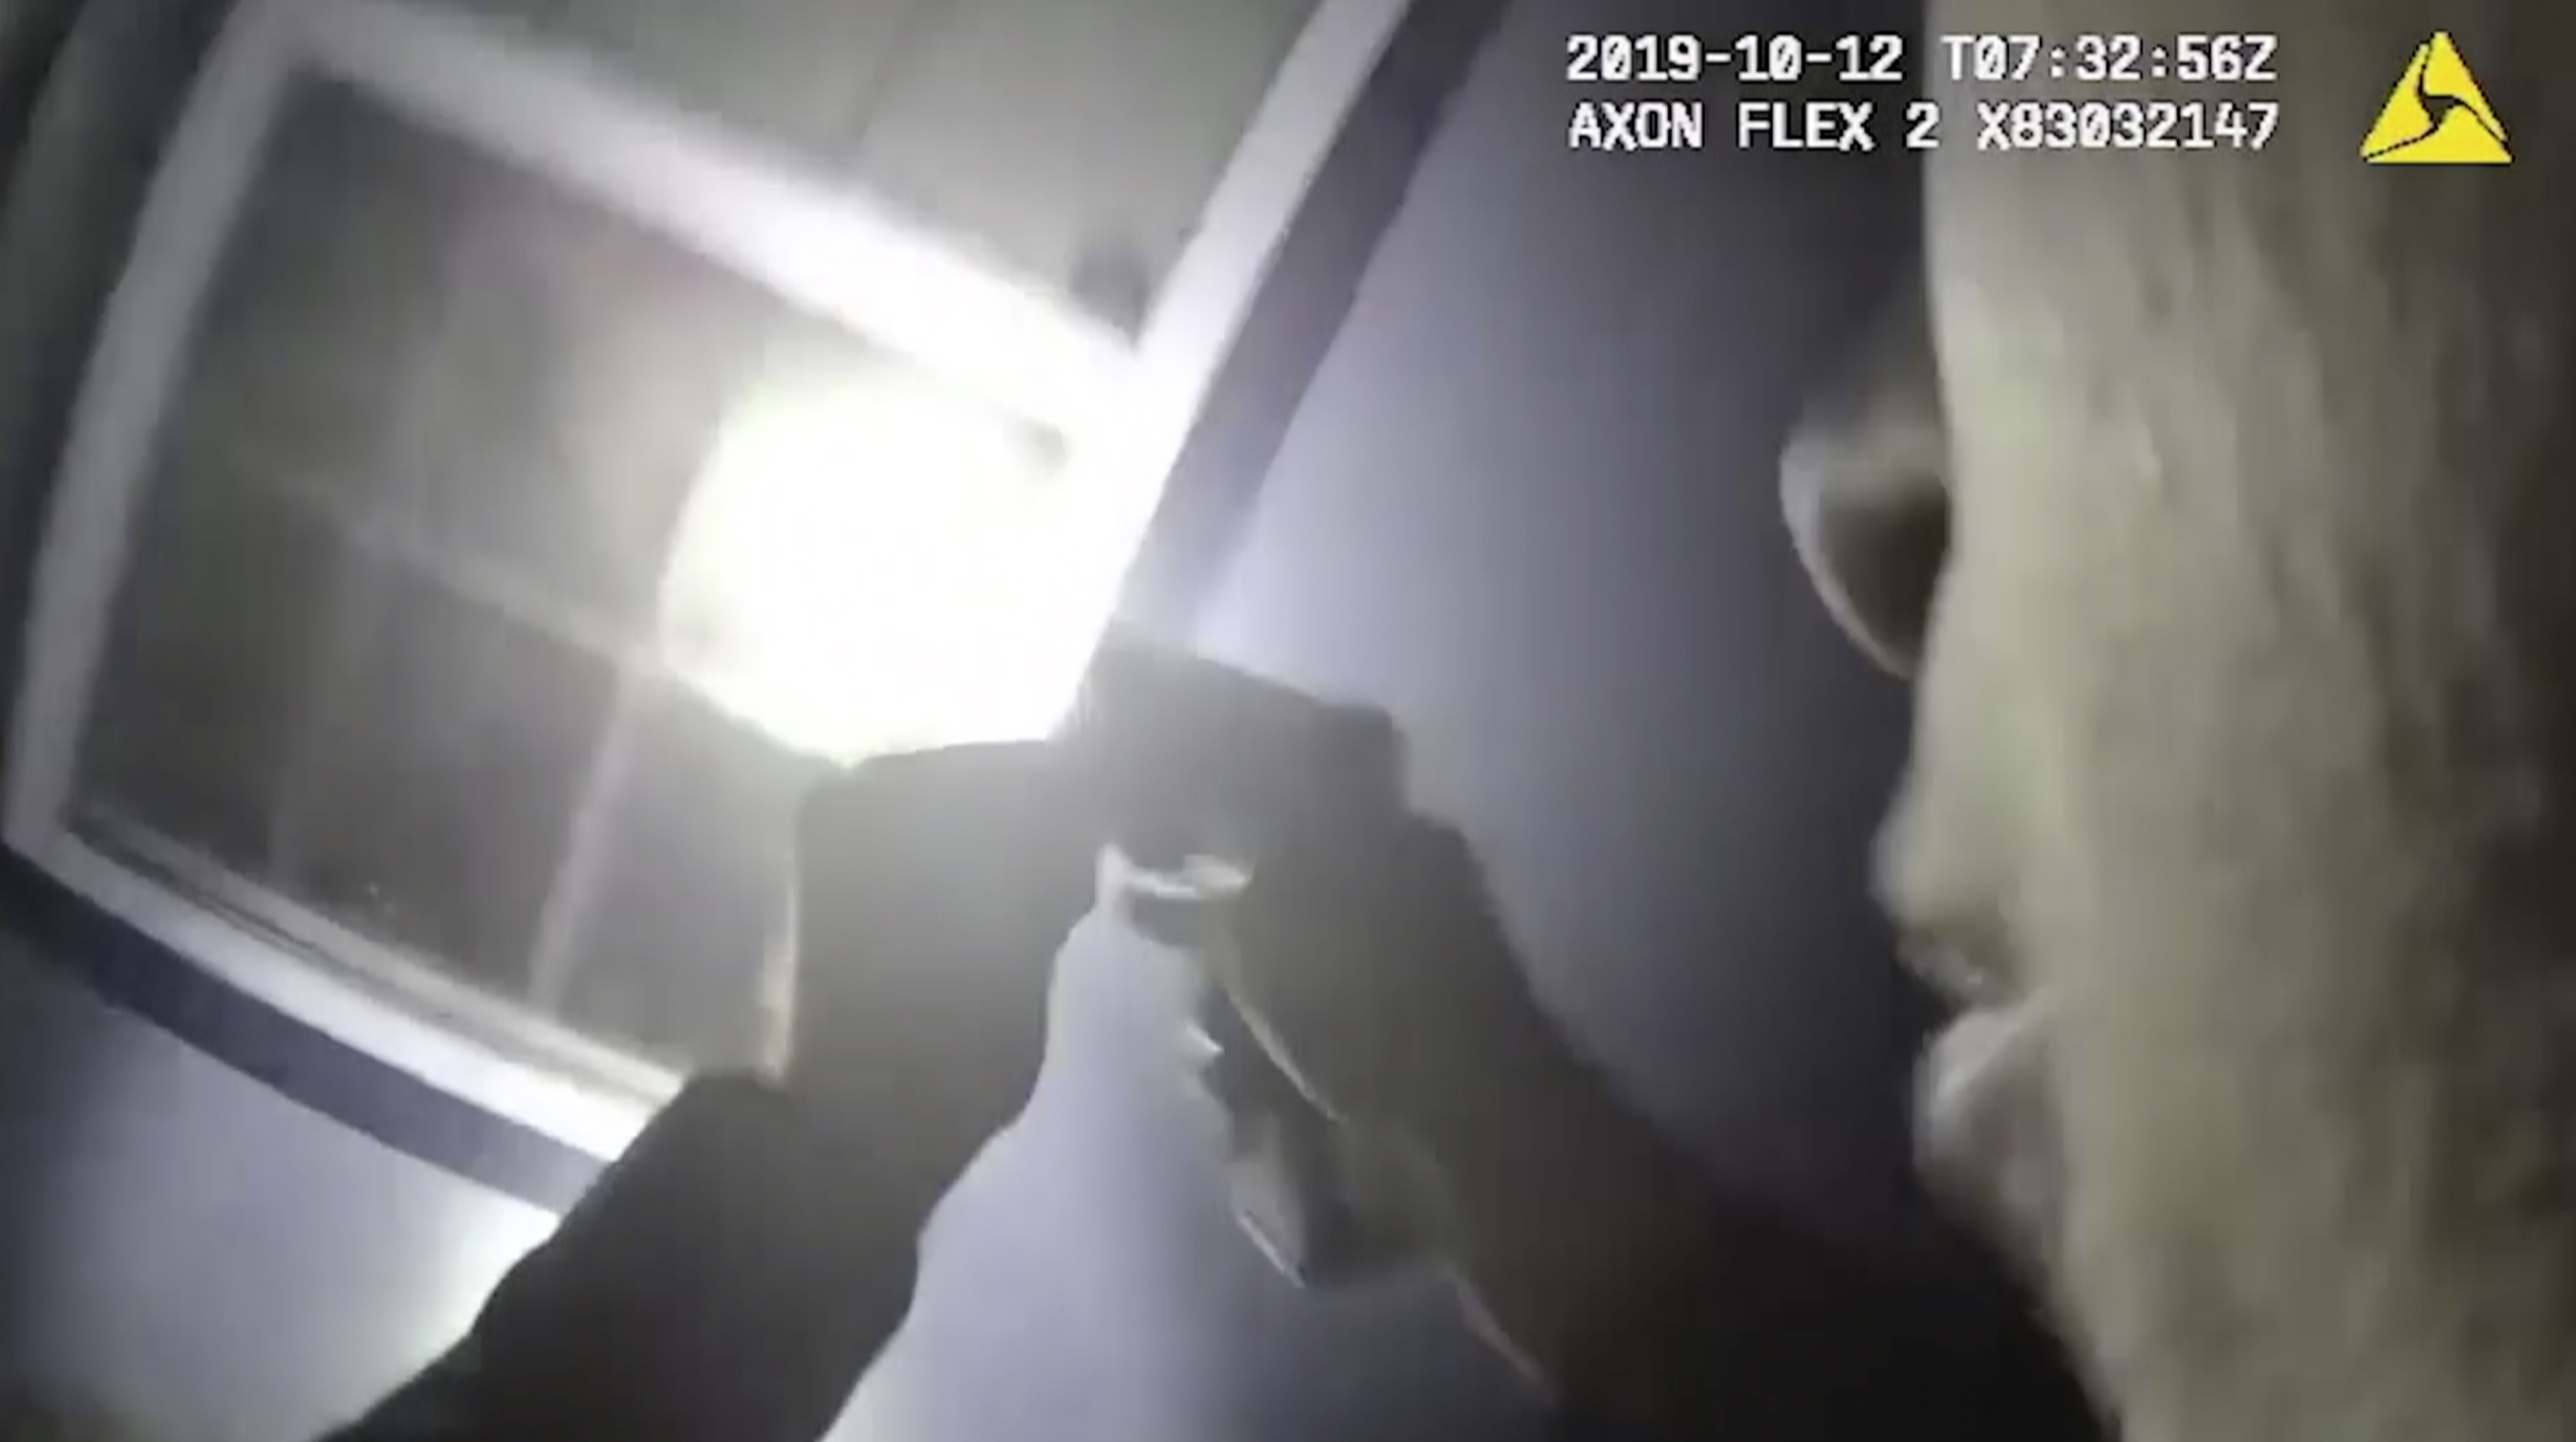 In this Saturday, Oct. 12, 2019, image made from a body camera video released by the Fort Worth Police Department an officer shines a flashlight into a window in Fort Worth, Texas. A black woman was fatally shot by a white Fort Worth, Texas, officer inside the home early Saturday after police were called to the residence for a welfare check, authorities said. The Tarrant County Medical Examiner's Office identified her as 28-year-old Atatiana Jefferson. (Fort Worth Police Department via AP)